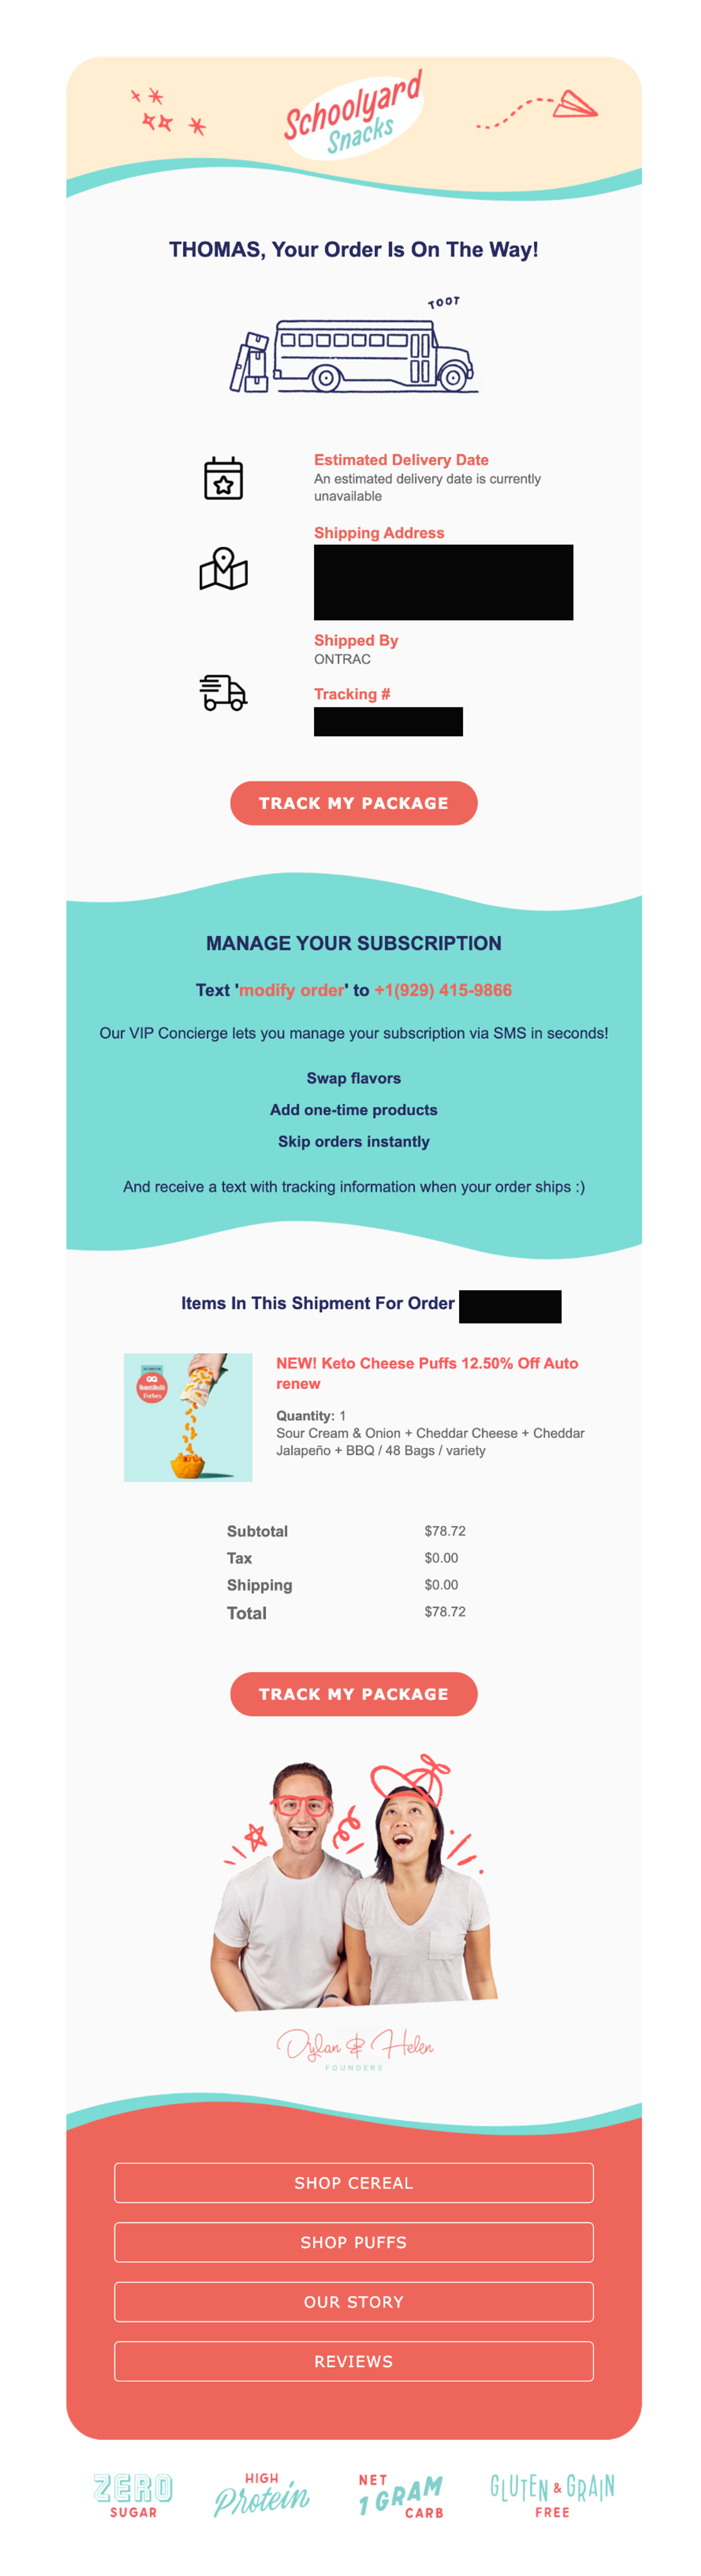 Schoolyard Snacks Order Confirmation Food and Beverage Email Template 